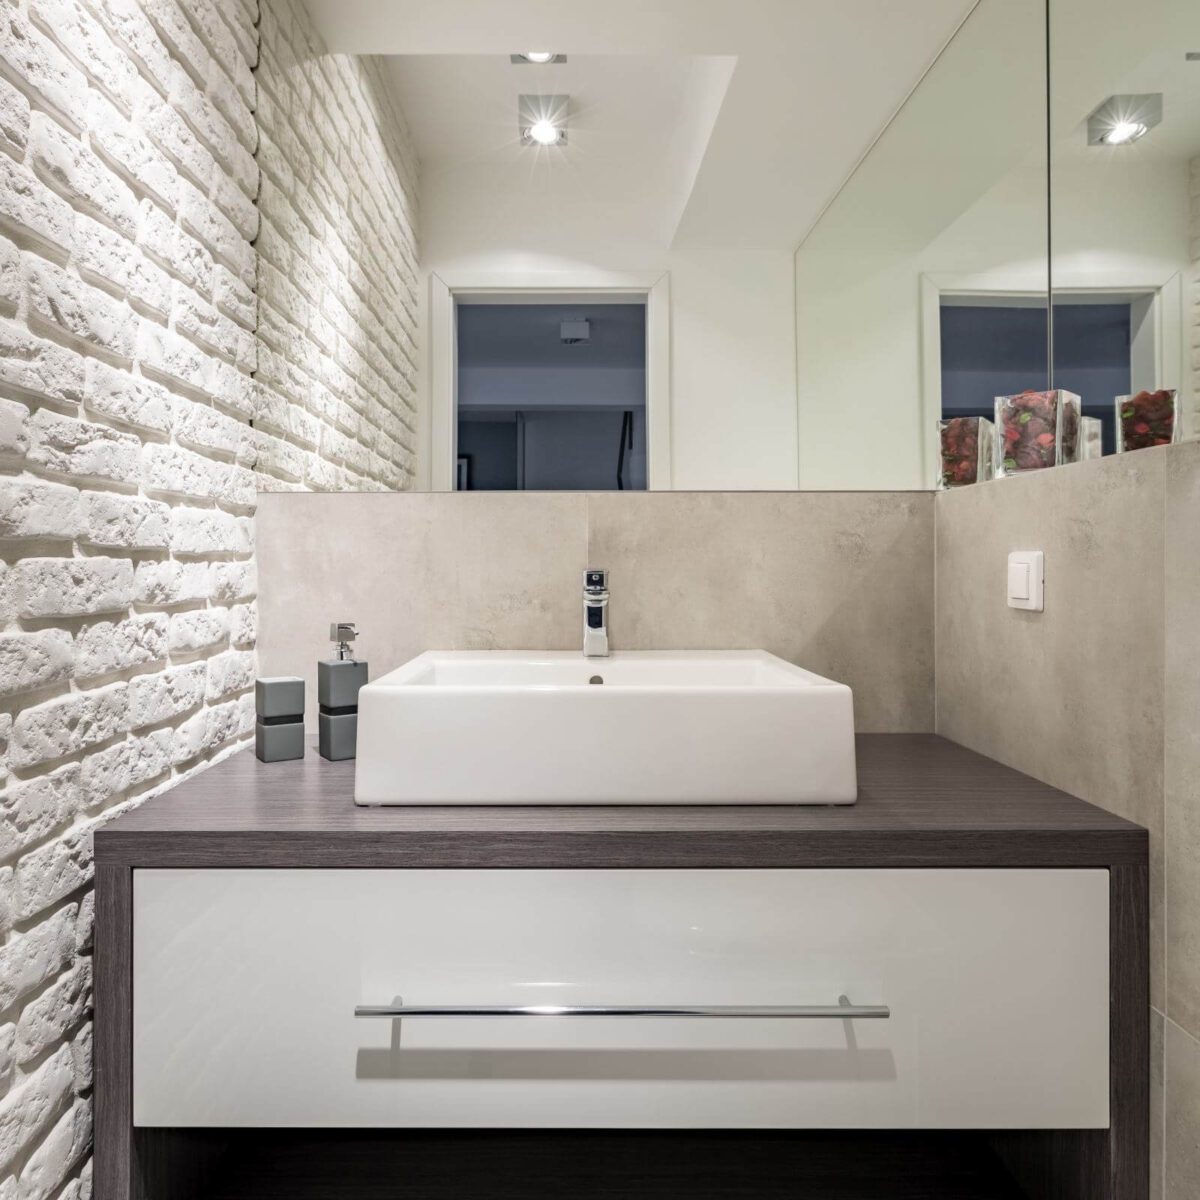 Bathroom with white brick tiles, mirror and countertop basin